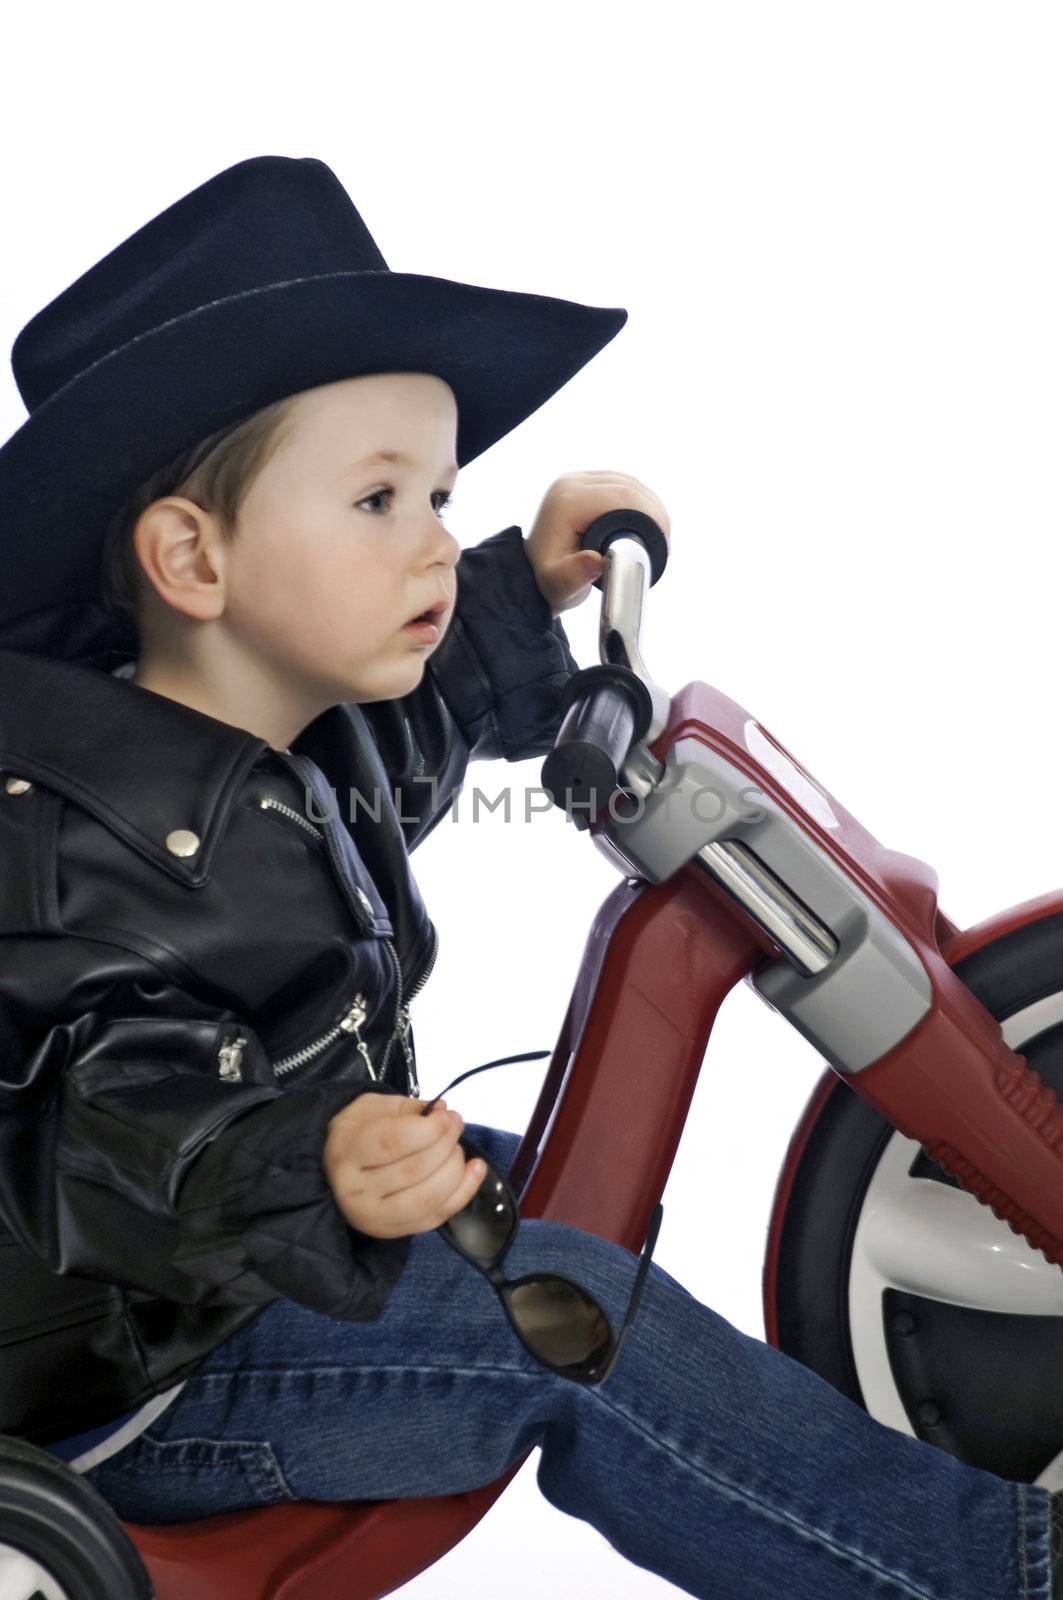 Baby Easy Rider by rcarner